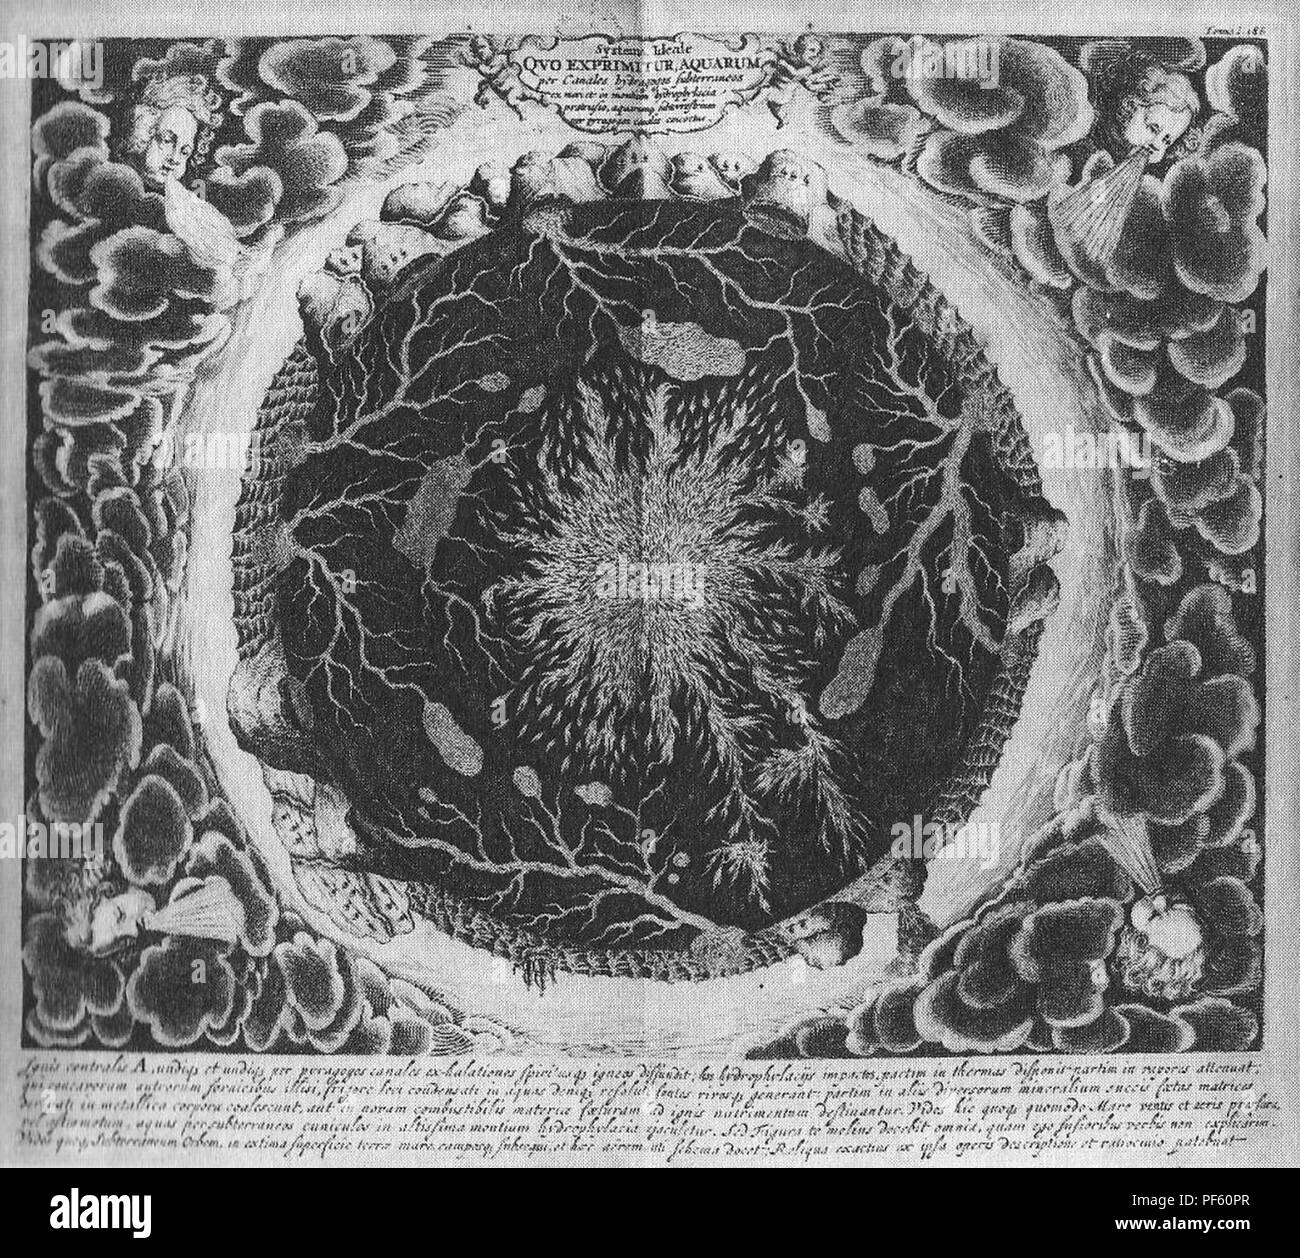 Athanasius Kircher Interior of the earth. Stock Photo